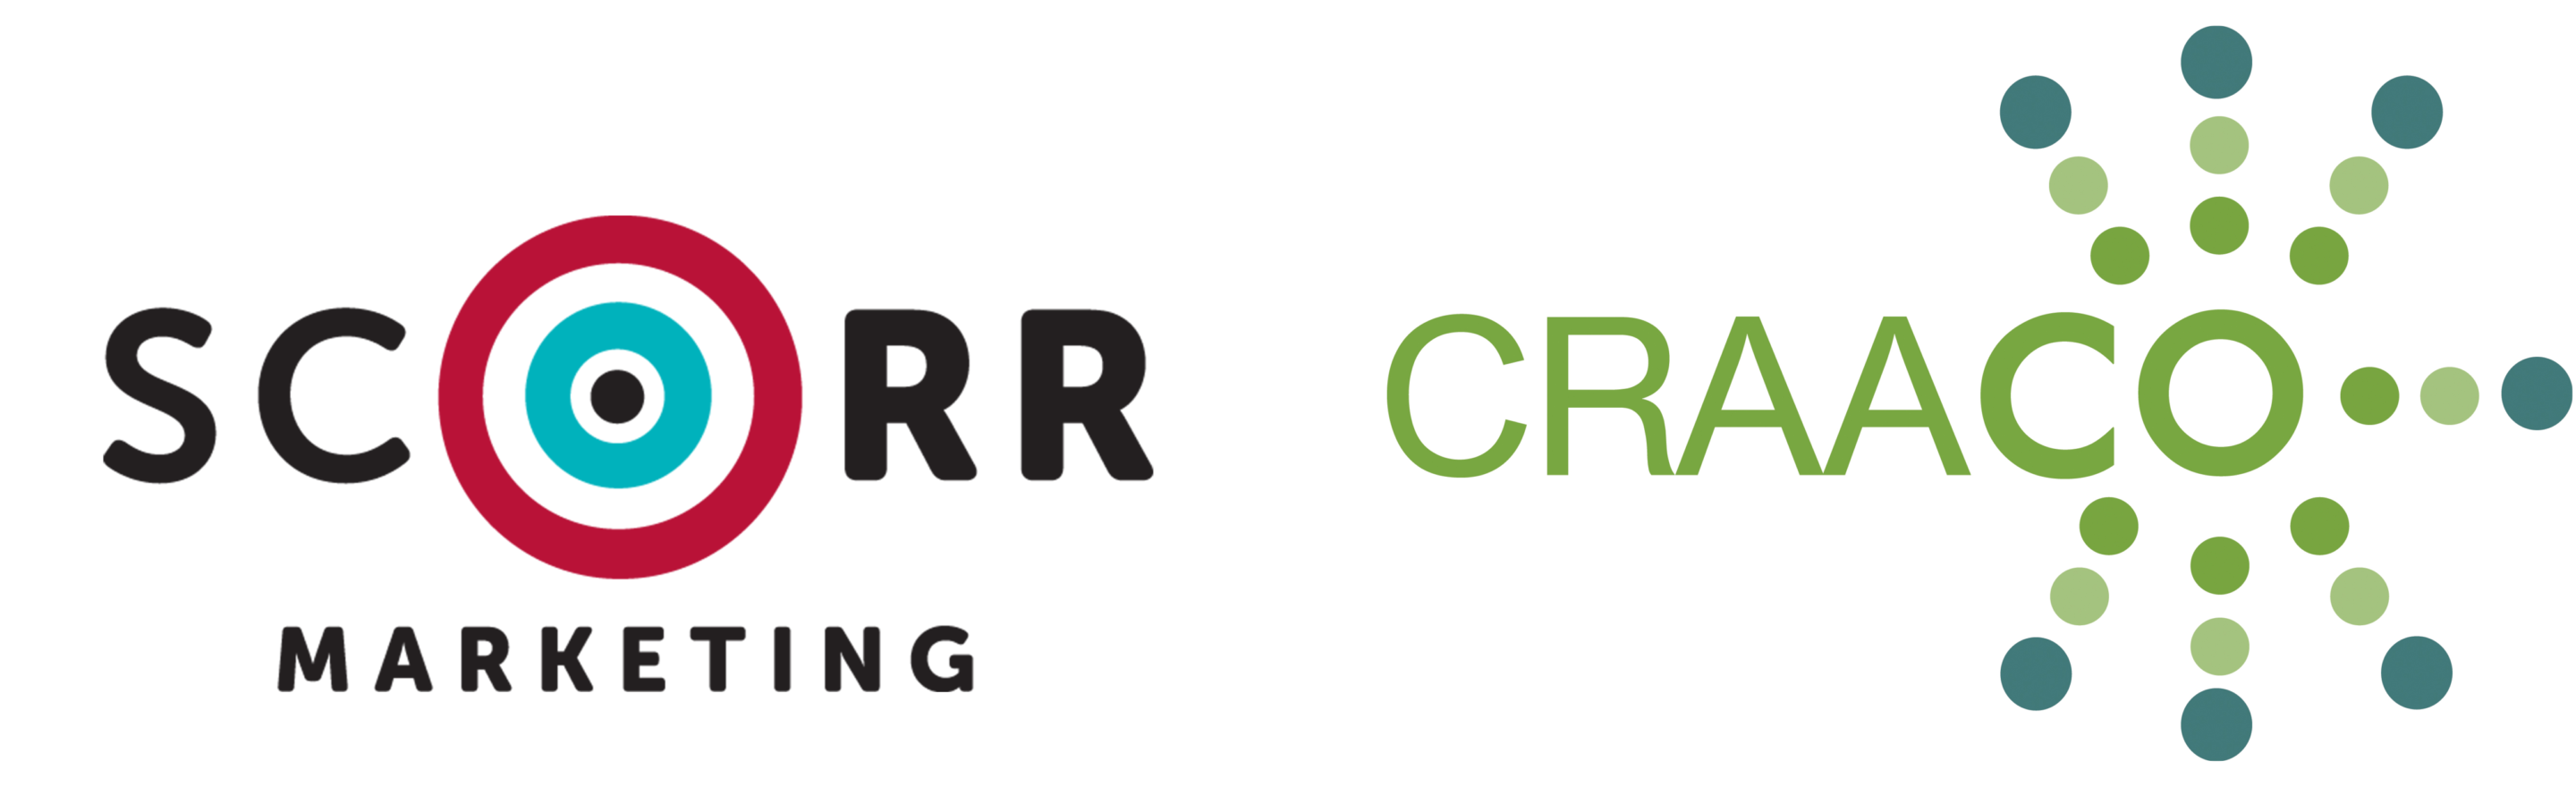 SCORR Marketing and the Conference Forum to Collaborate on CRAACO Conference